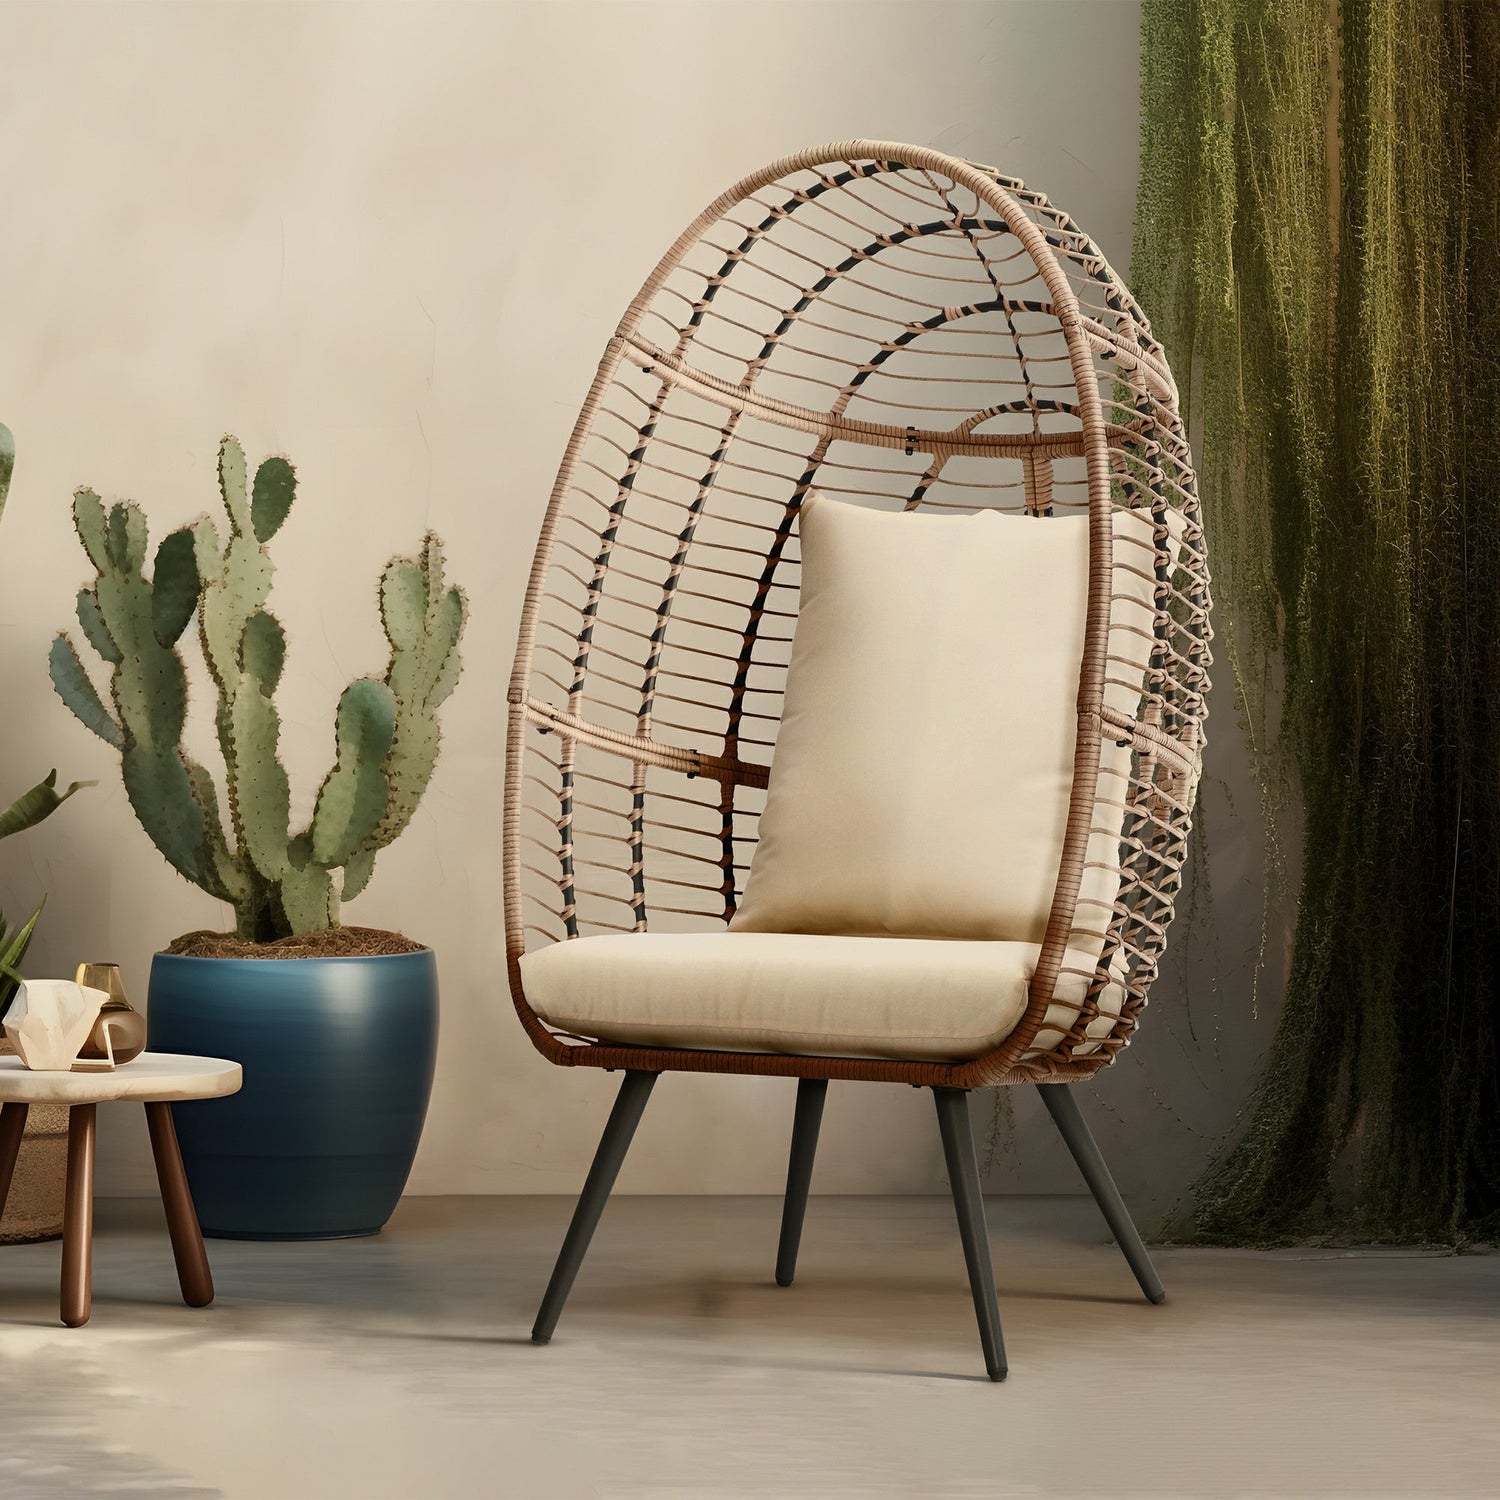 How To Install Jardina's Wicker Egg Chair?